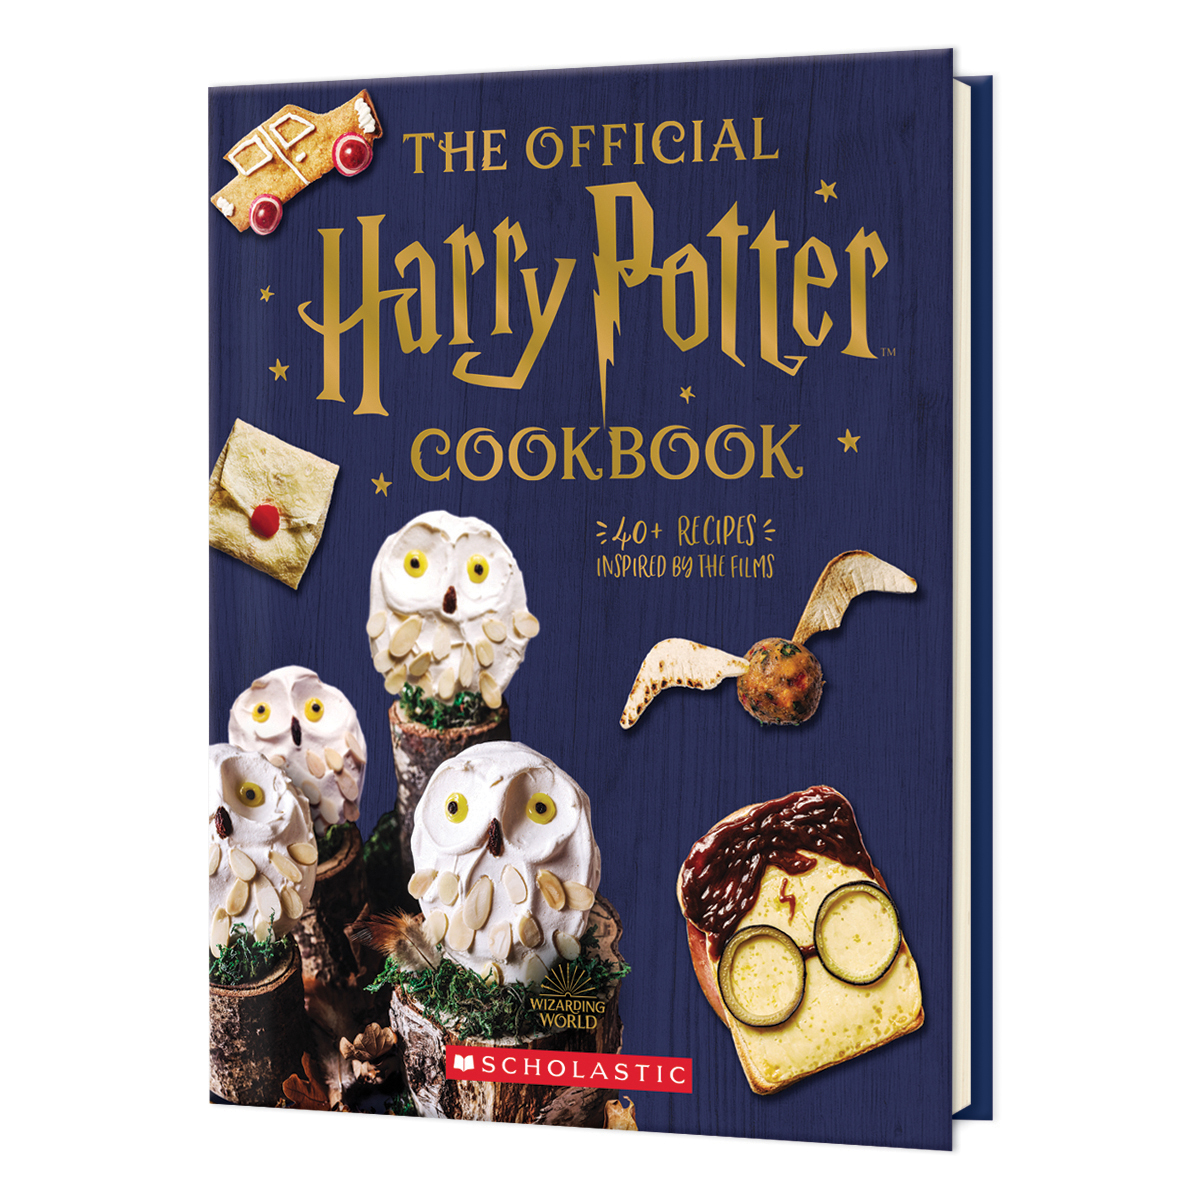  The Official Harry Potter Cookbook 